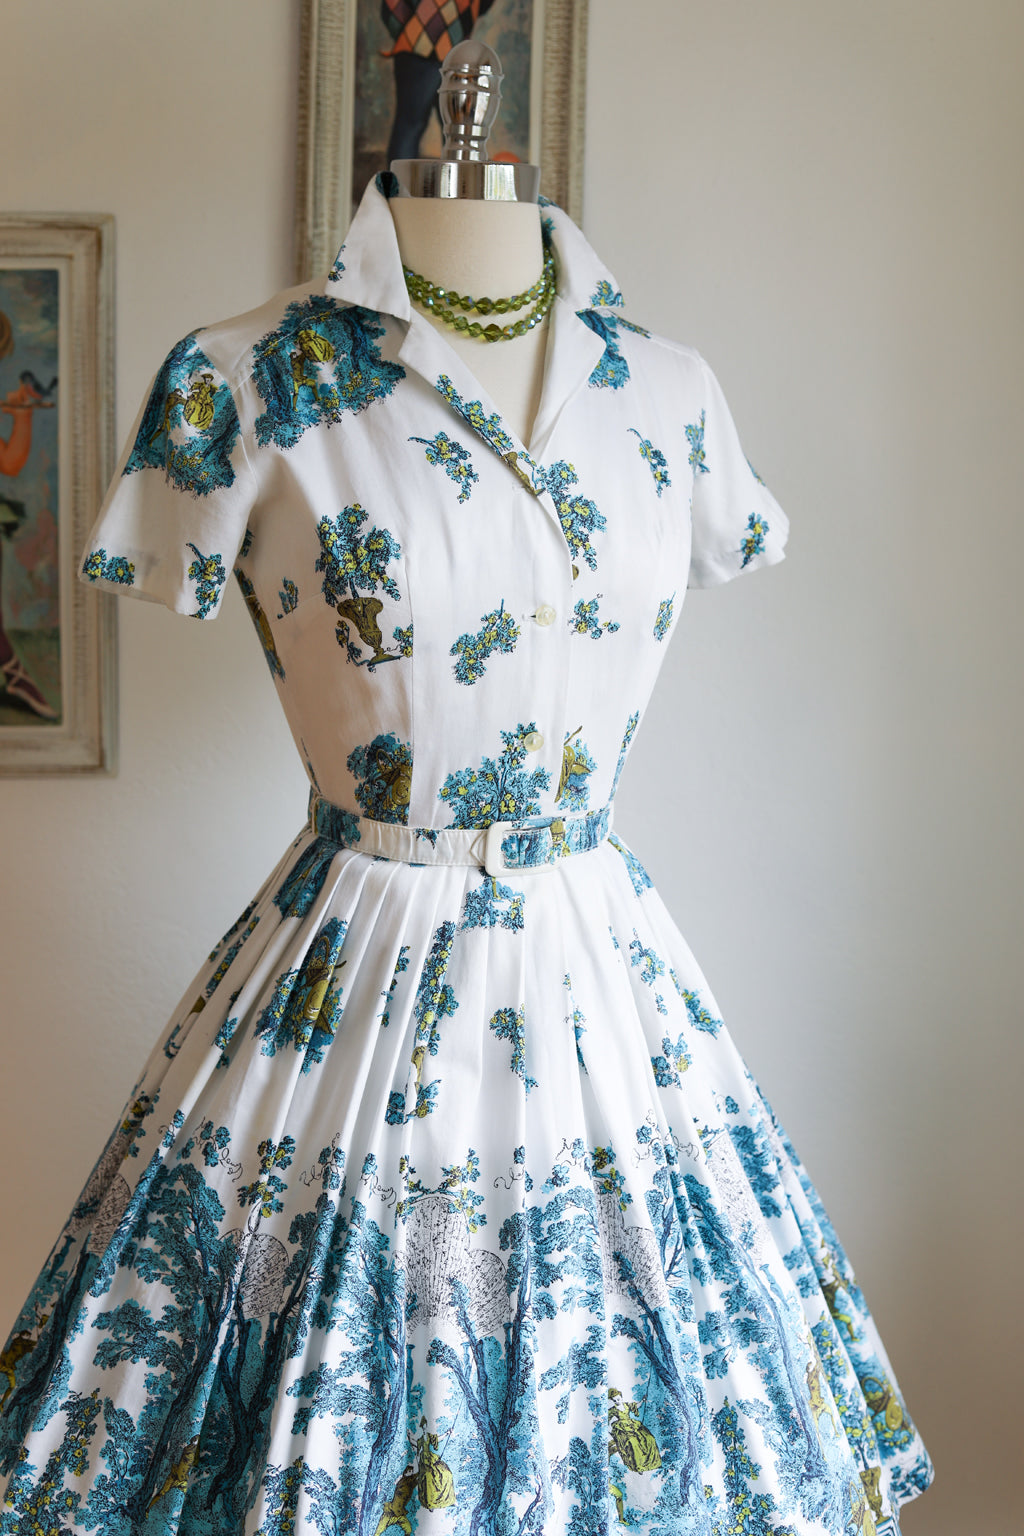 Vintage 1950s Dress - Turquoise + Chartreuse Romance Toile Novelty Print w Pear Trees + Lovers Cavorting Shirtwaist Size XS